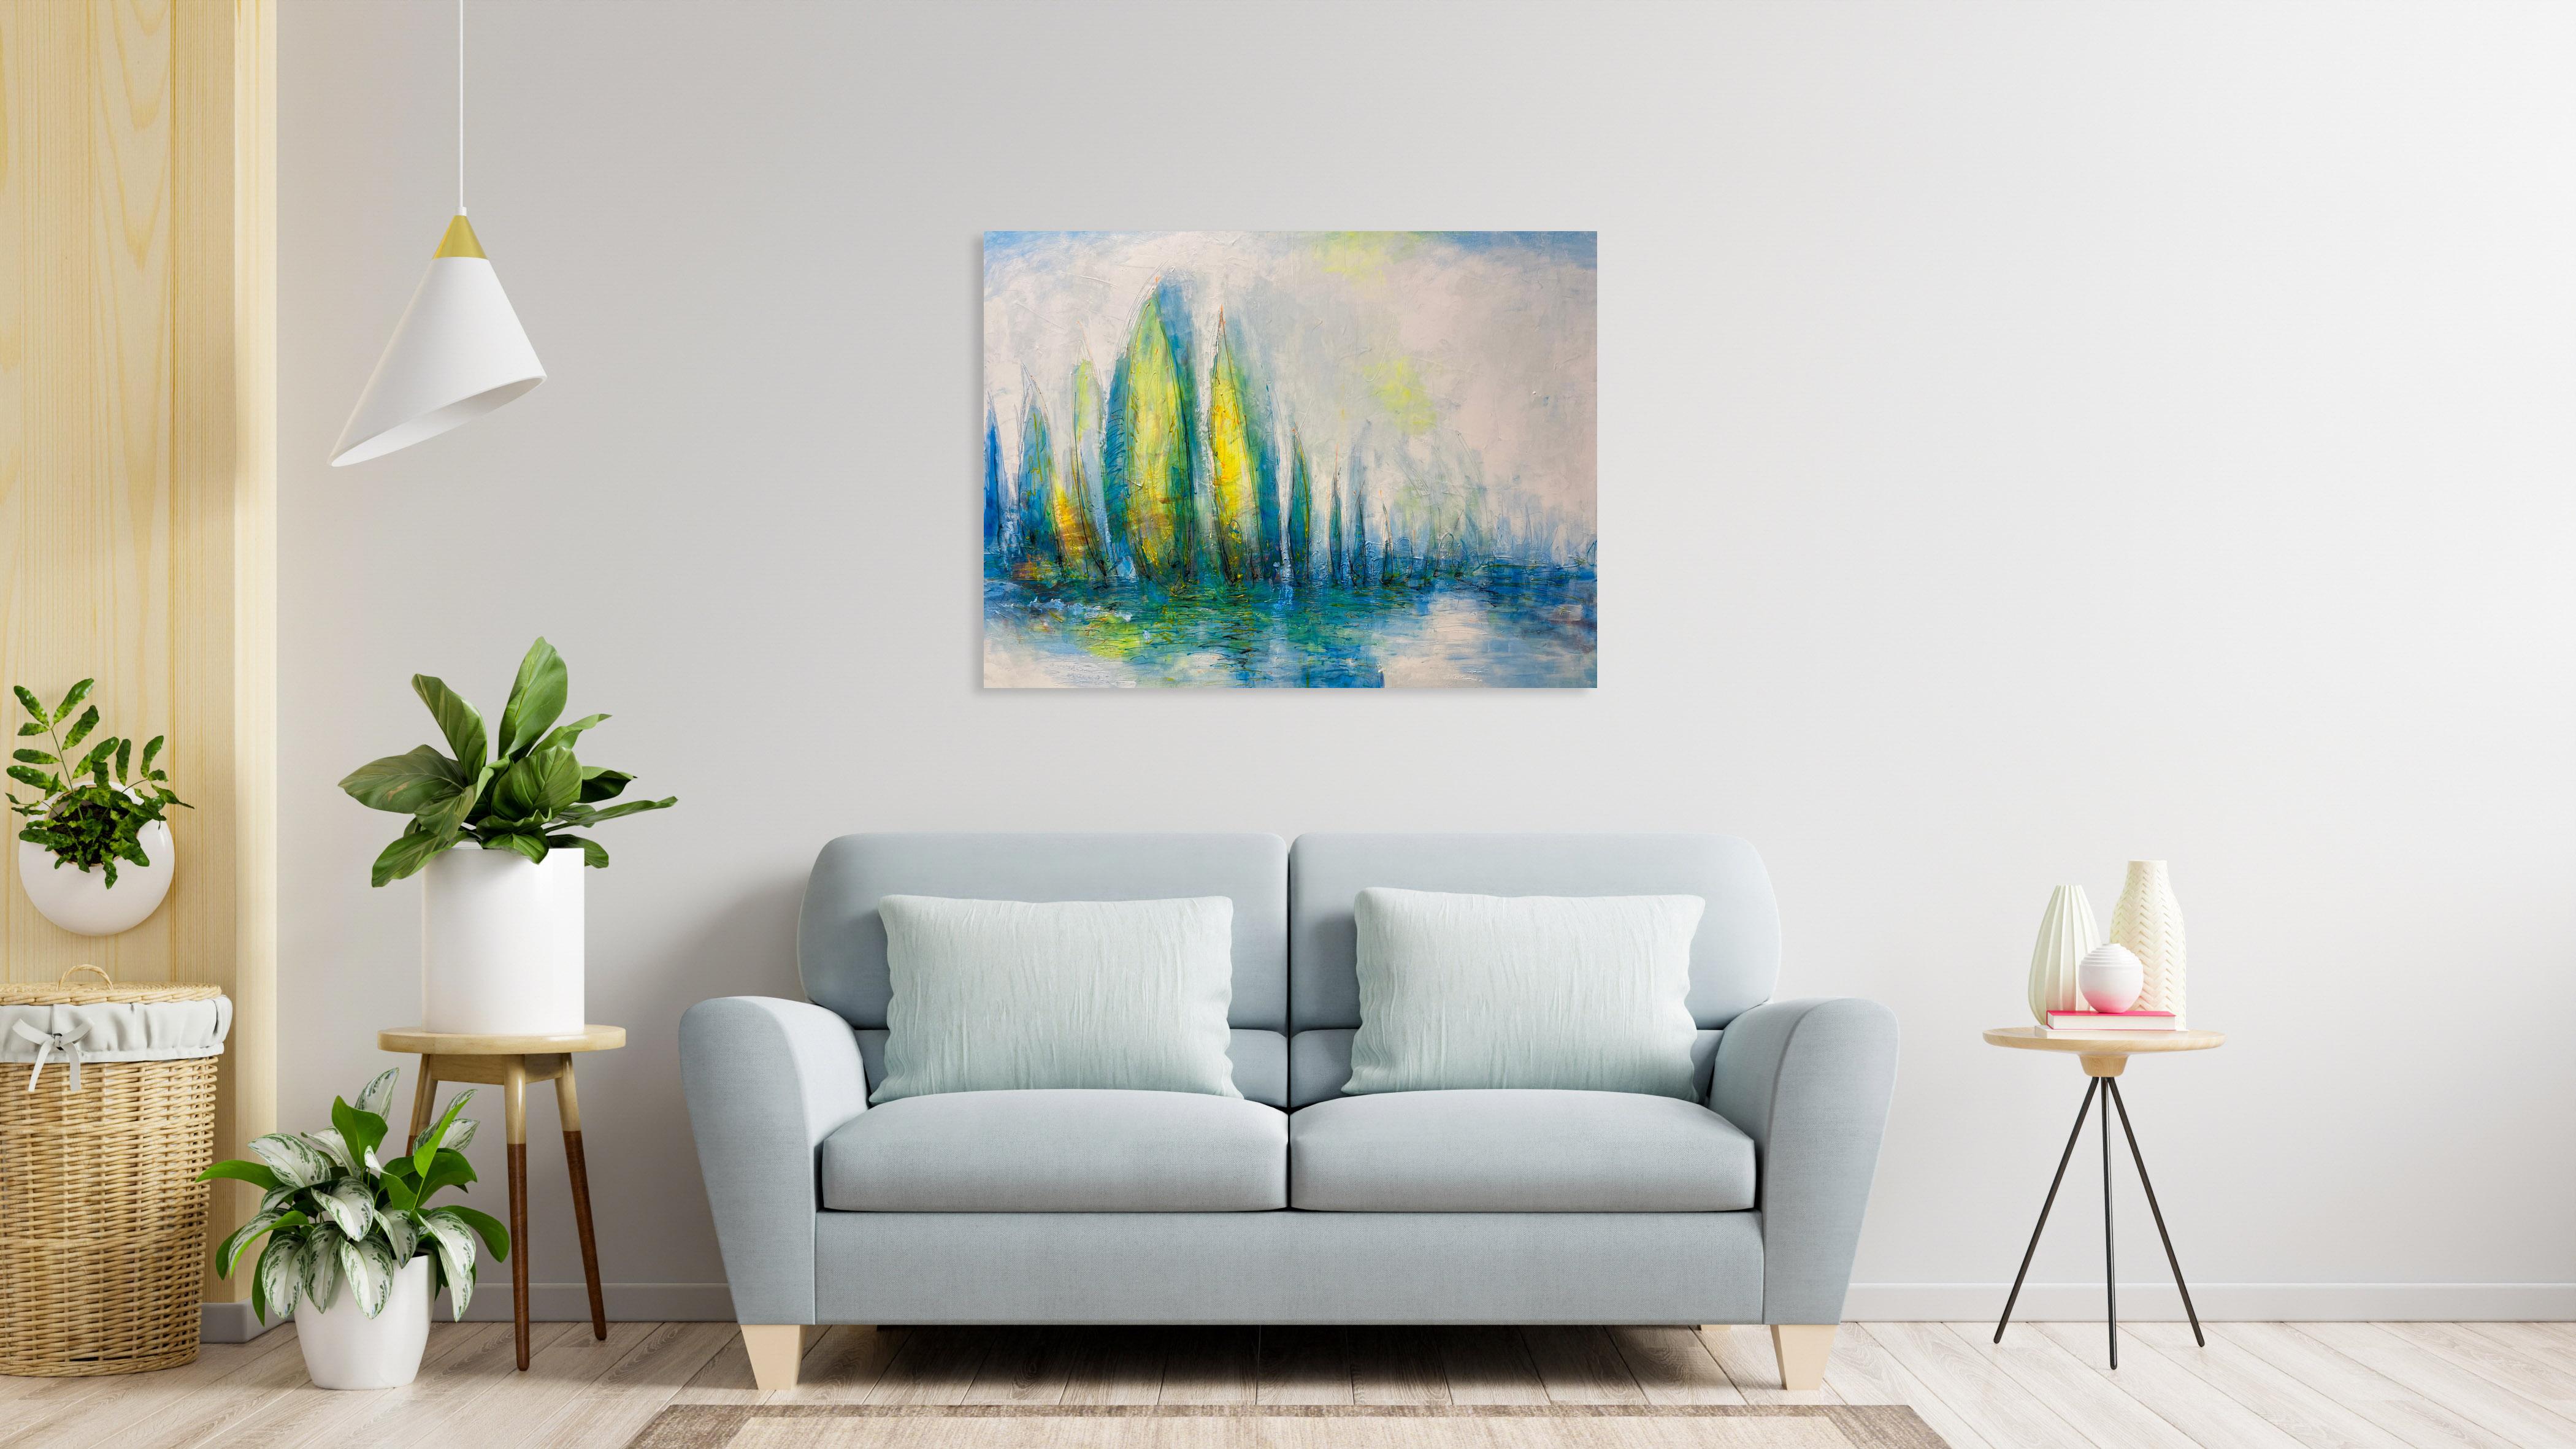 Ships At Sea - Landscape Painting - Acrylic On Canvas By Oreydis For Sale 1